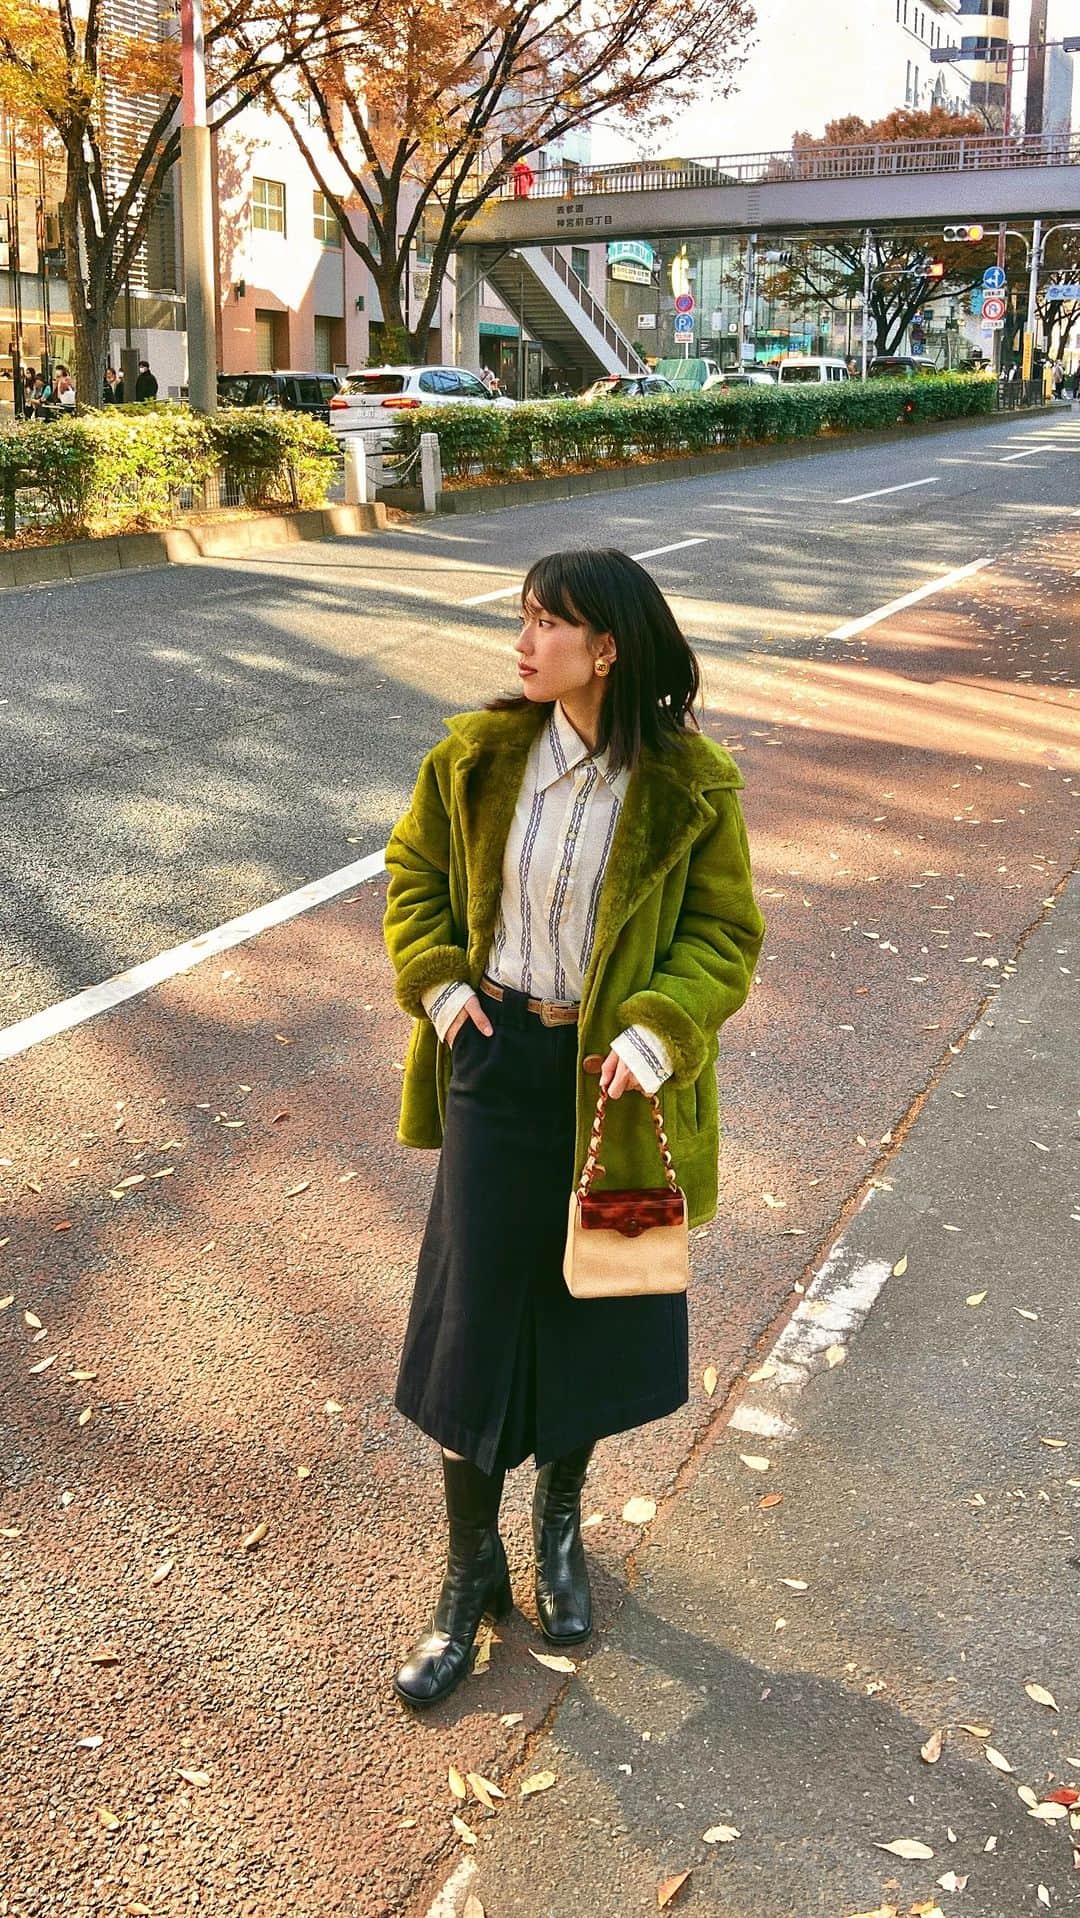 vintage Qooのインスタグラム：「Current mood 🍂  Shearling coat from #Loewe vintage Bag from #Chanel vintage   ▼Customer service English/Chinese/Korean/Japanese *Please feel free to contact us! *商品が見つからない場合にはDMにてお問い合わせください   ▼International shipping via our online store. Link in bio.  #tokyovintageshop #오모테산도 #omotesando #aoyama #表参道 #명품빈티지 #빈티지패션 #도쿄빈티지샵  #ヴィンテージファッション #ヴィンテージショップ  #chanelvintage #chanel #vintagechanel #chanelclassic #chanellover #빈티지샤넬 #샤넬  #シャネル #샤넬클래식」